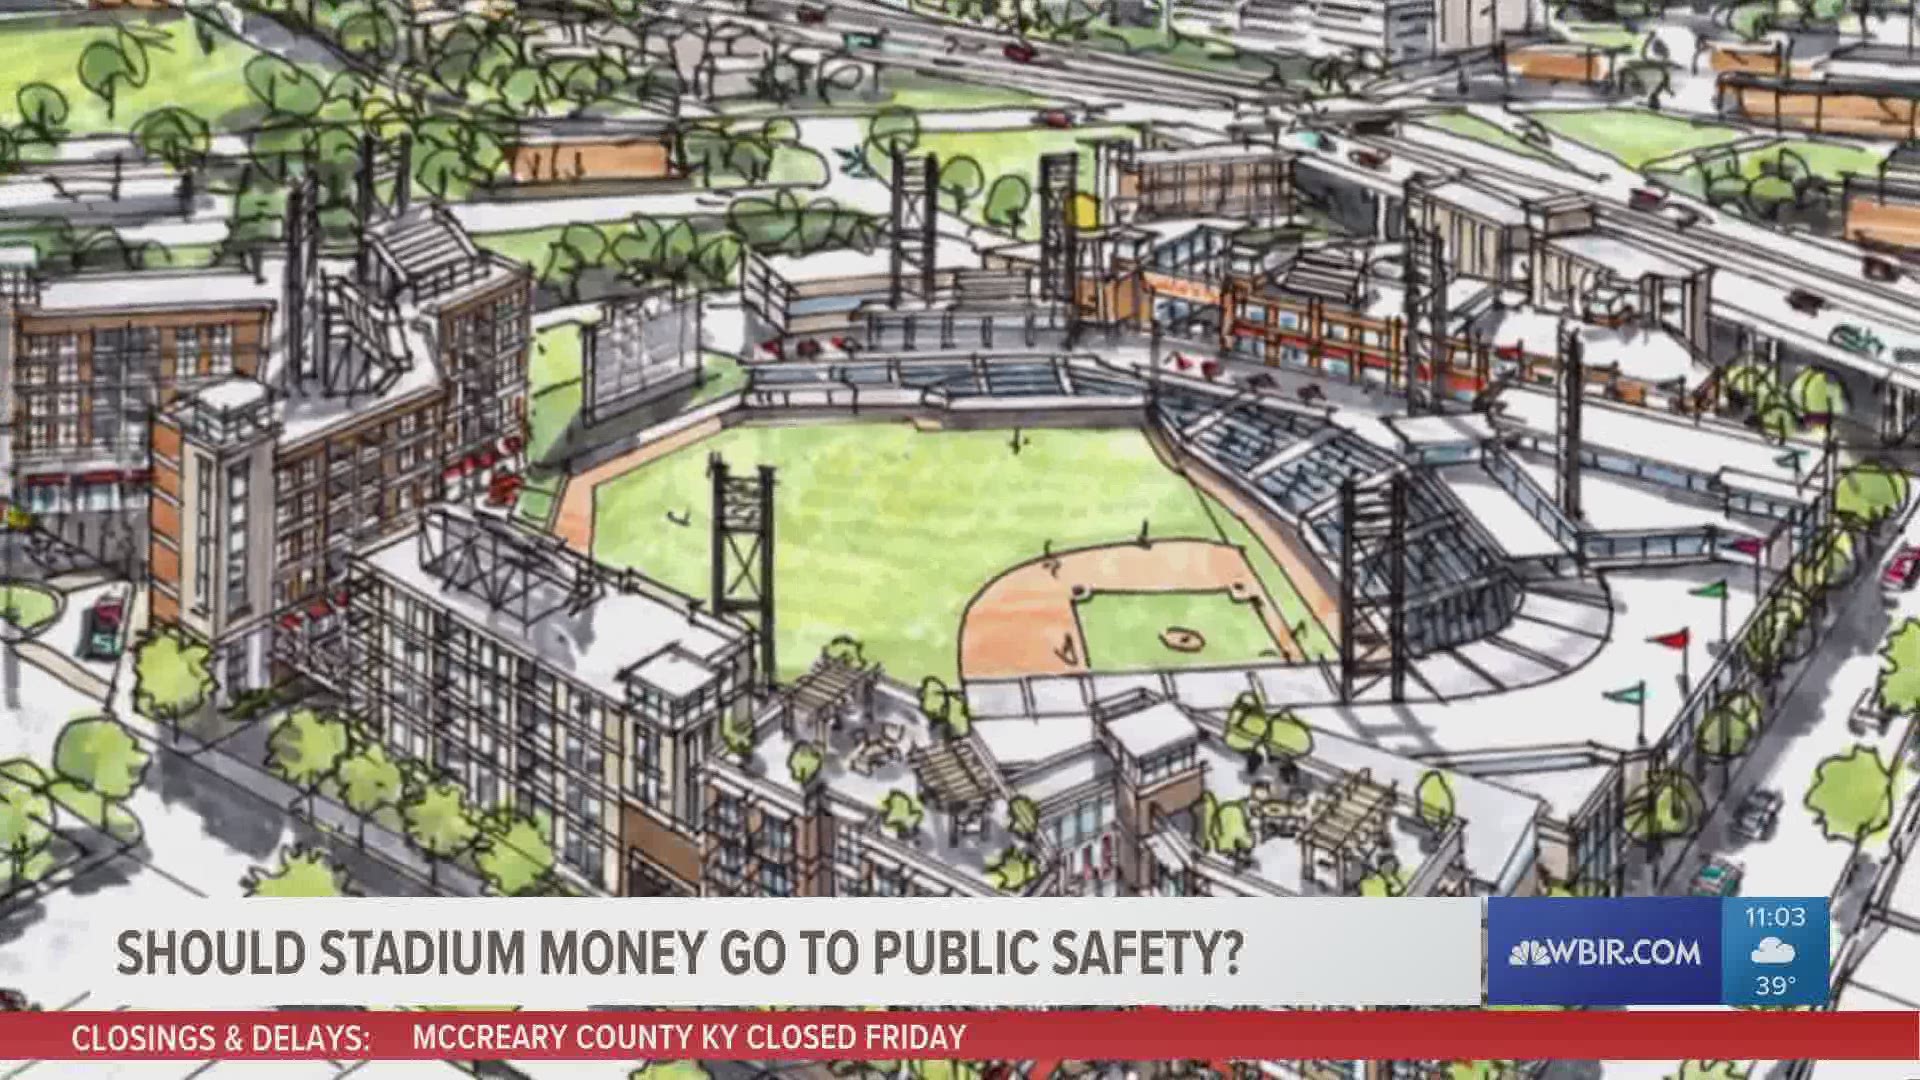 Many people have said that investing in public safety makes more sense than investing in a new stadium in downtown Knoxville.